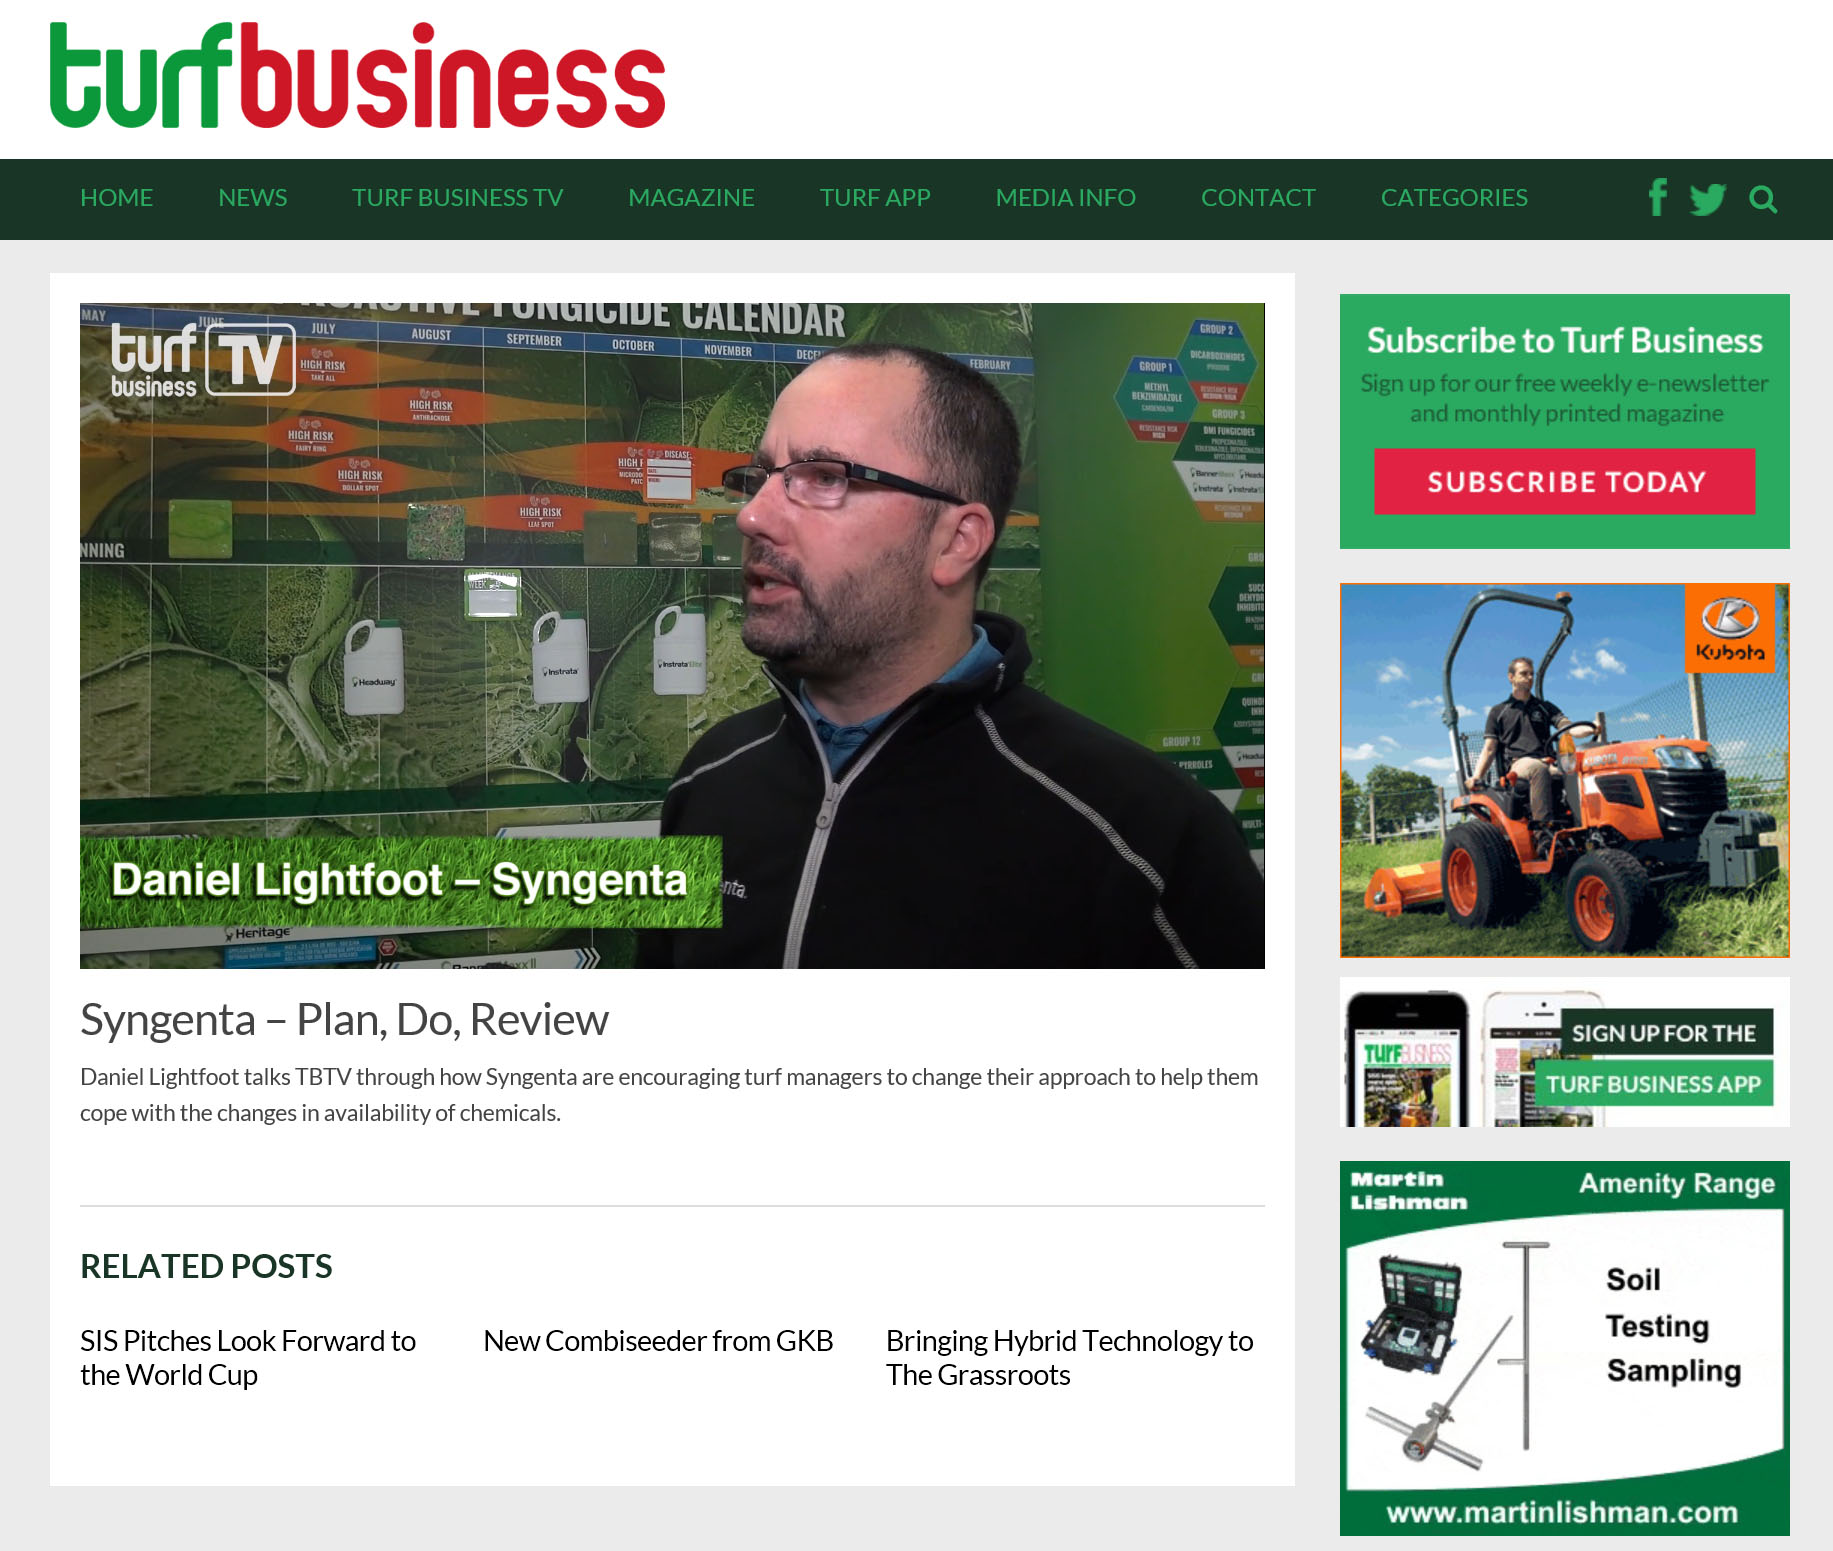 Turf Business TV page